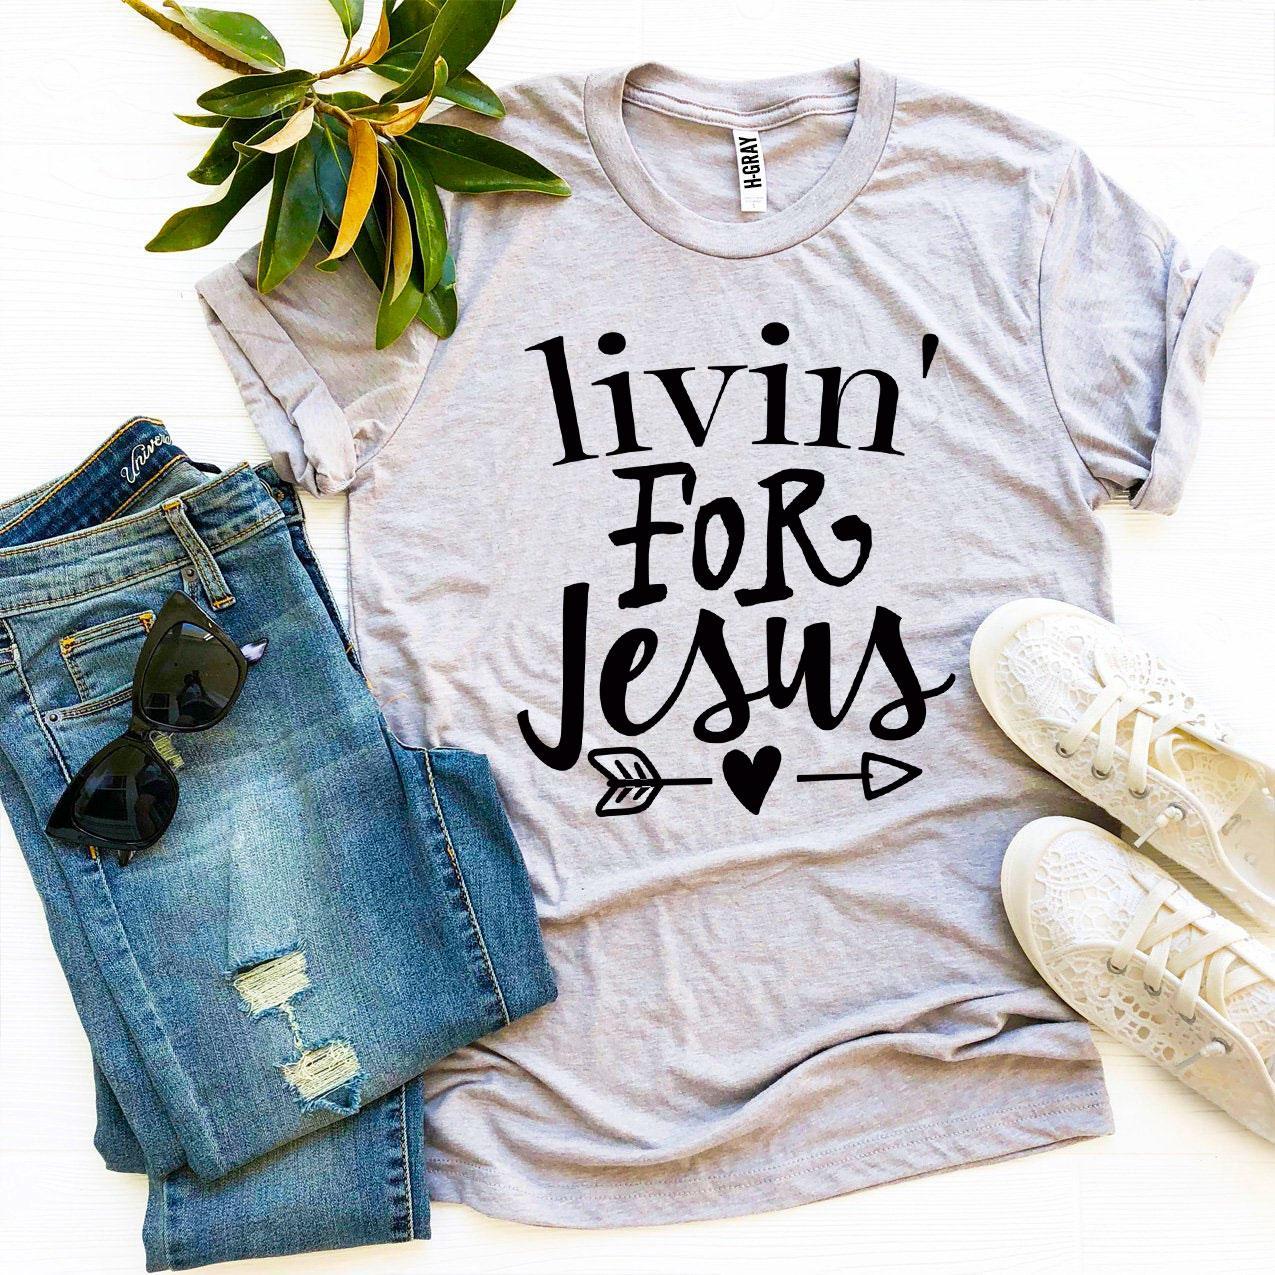 Livin For Jesus T-shirt - Faith & Flame - Books and Gifts - Agate -